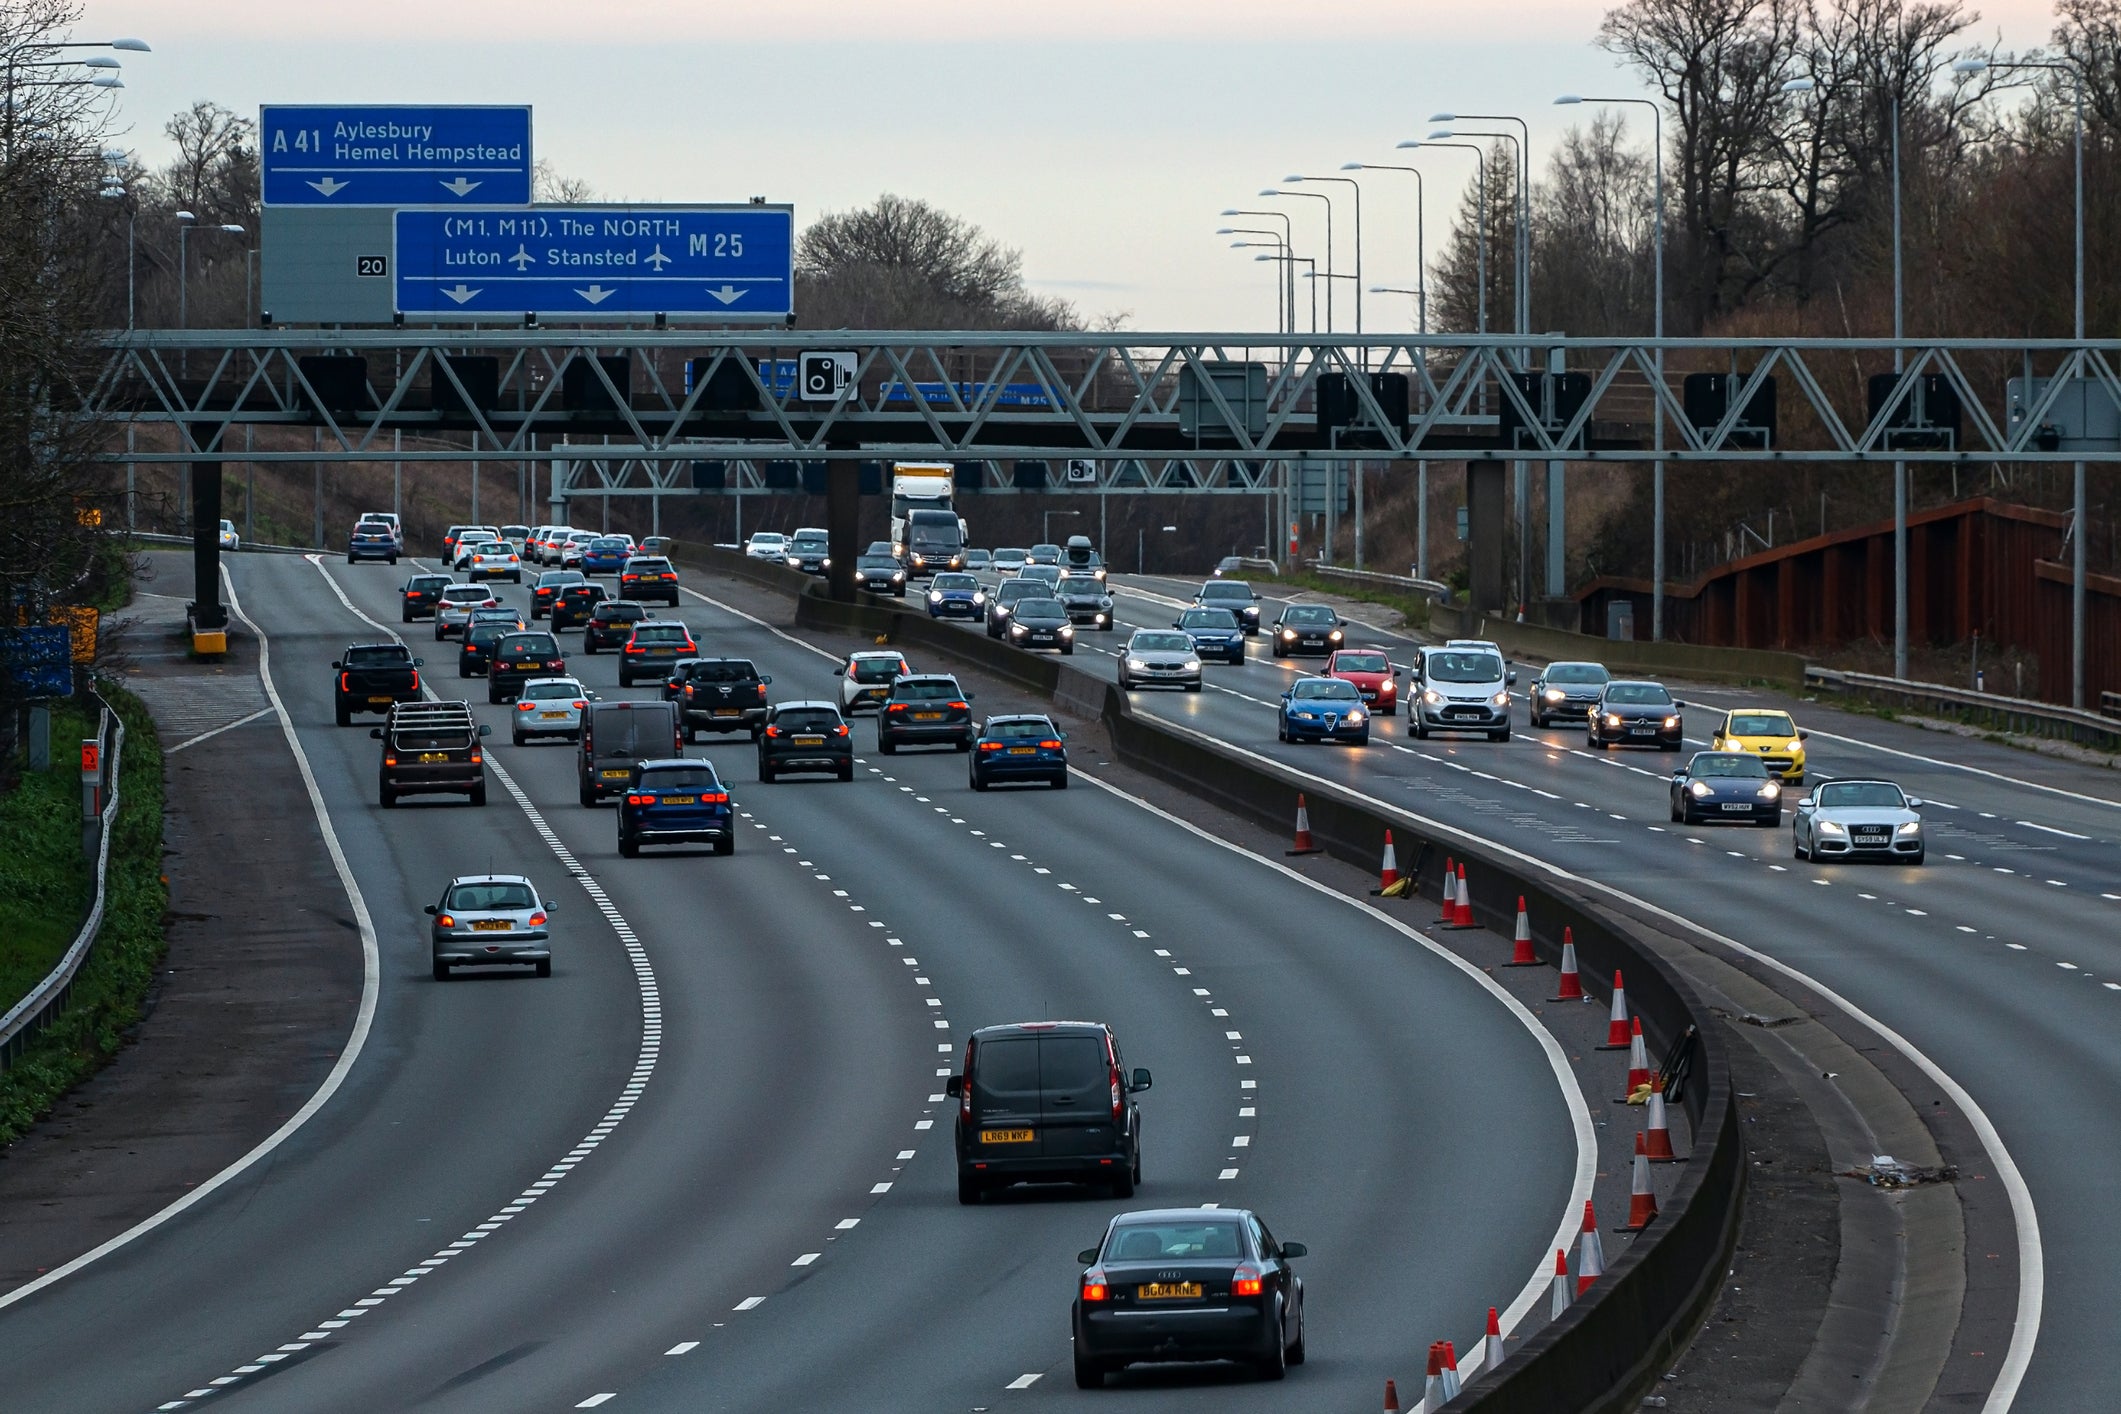 Expect delays this bank holiday weekend, says RAC